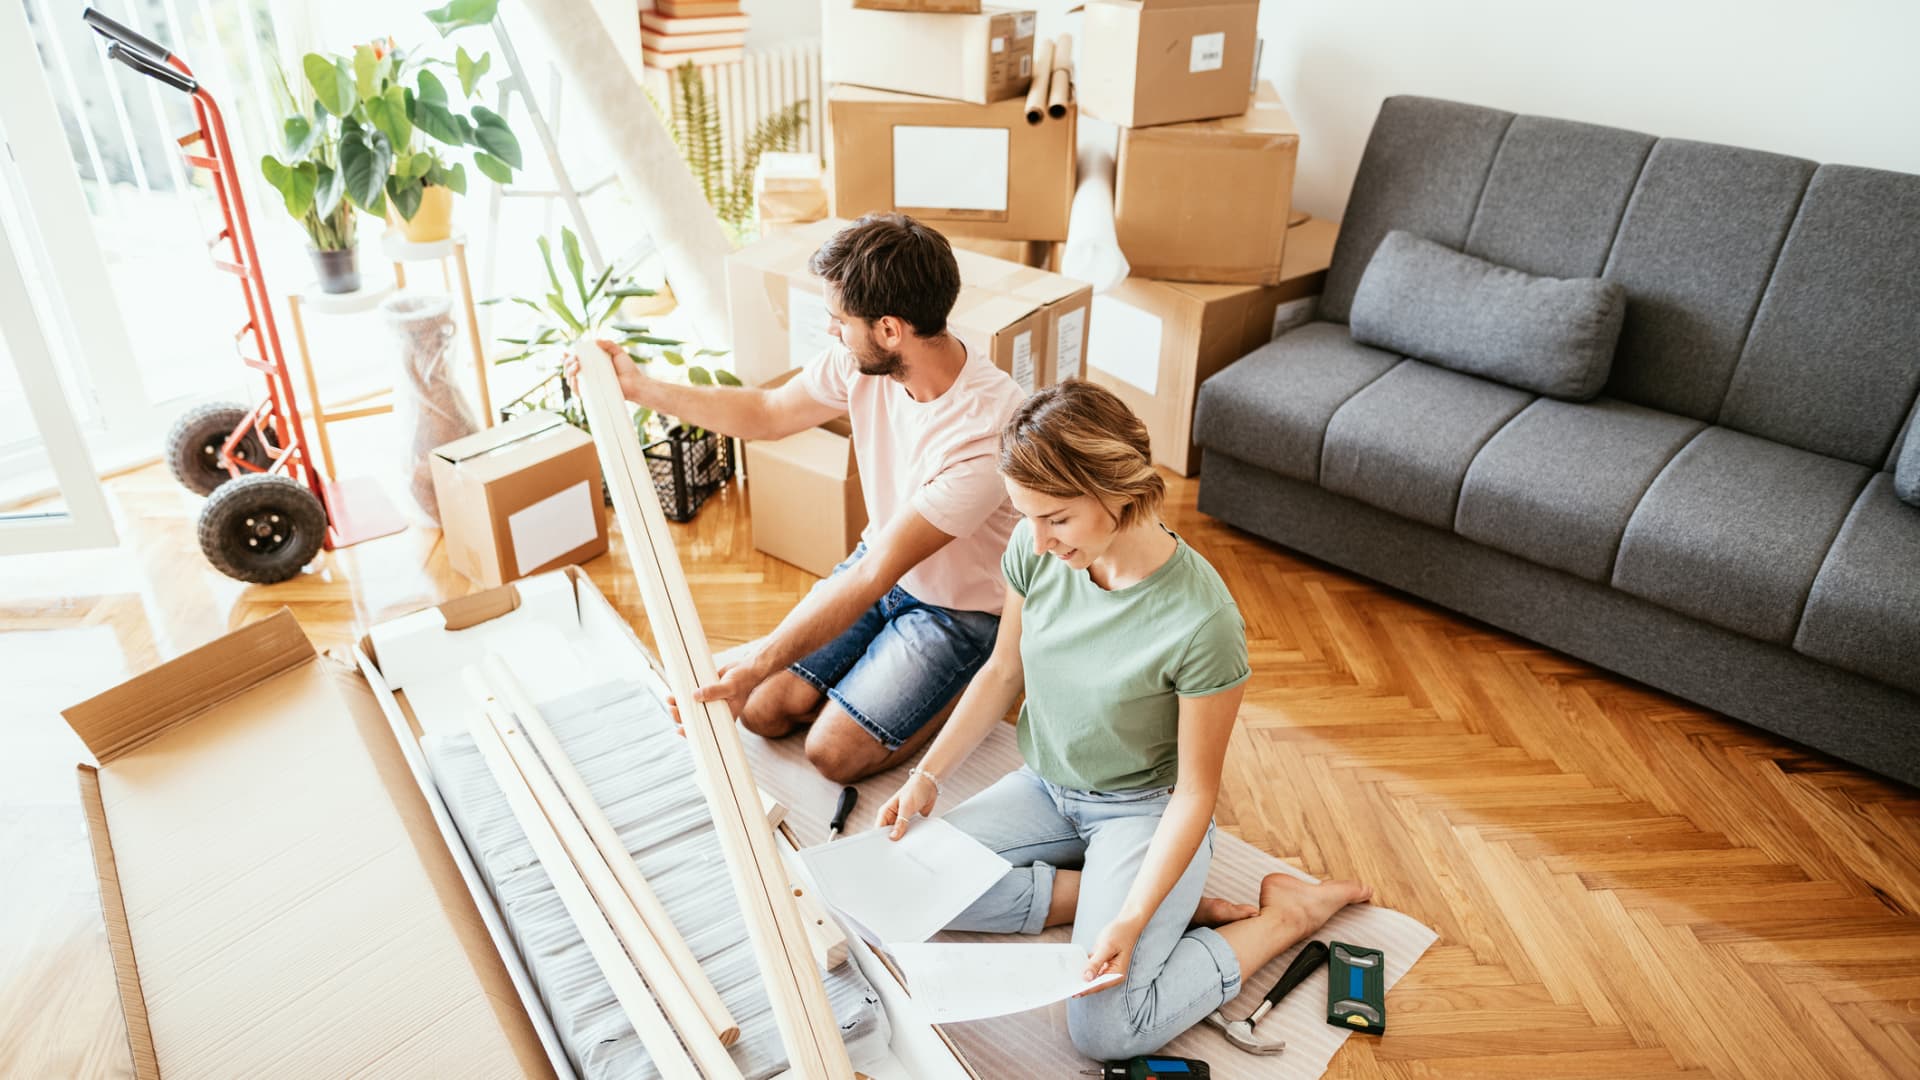 Gen Z, millennials are ‘house hacking’ to become homeowners in a tough market. How the strategy can help